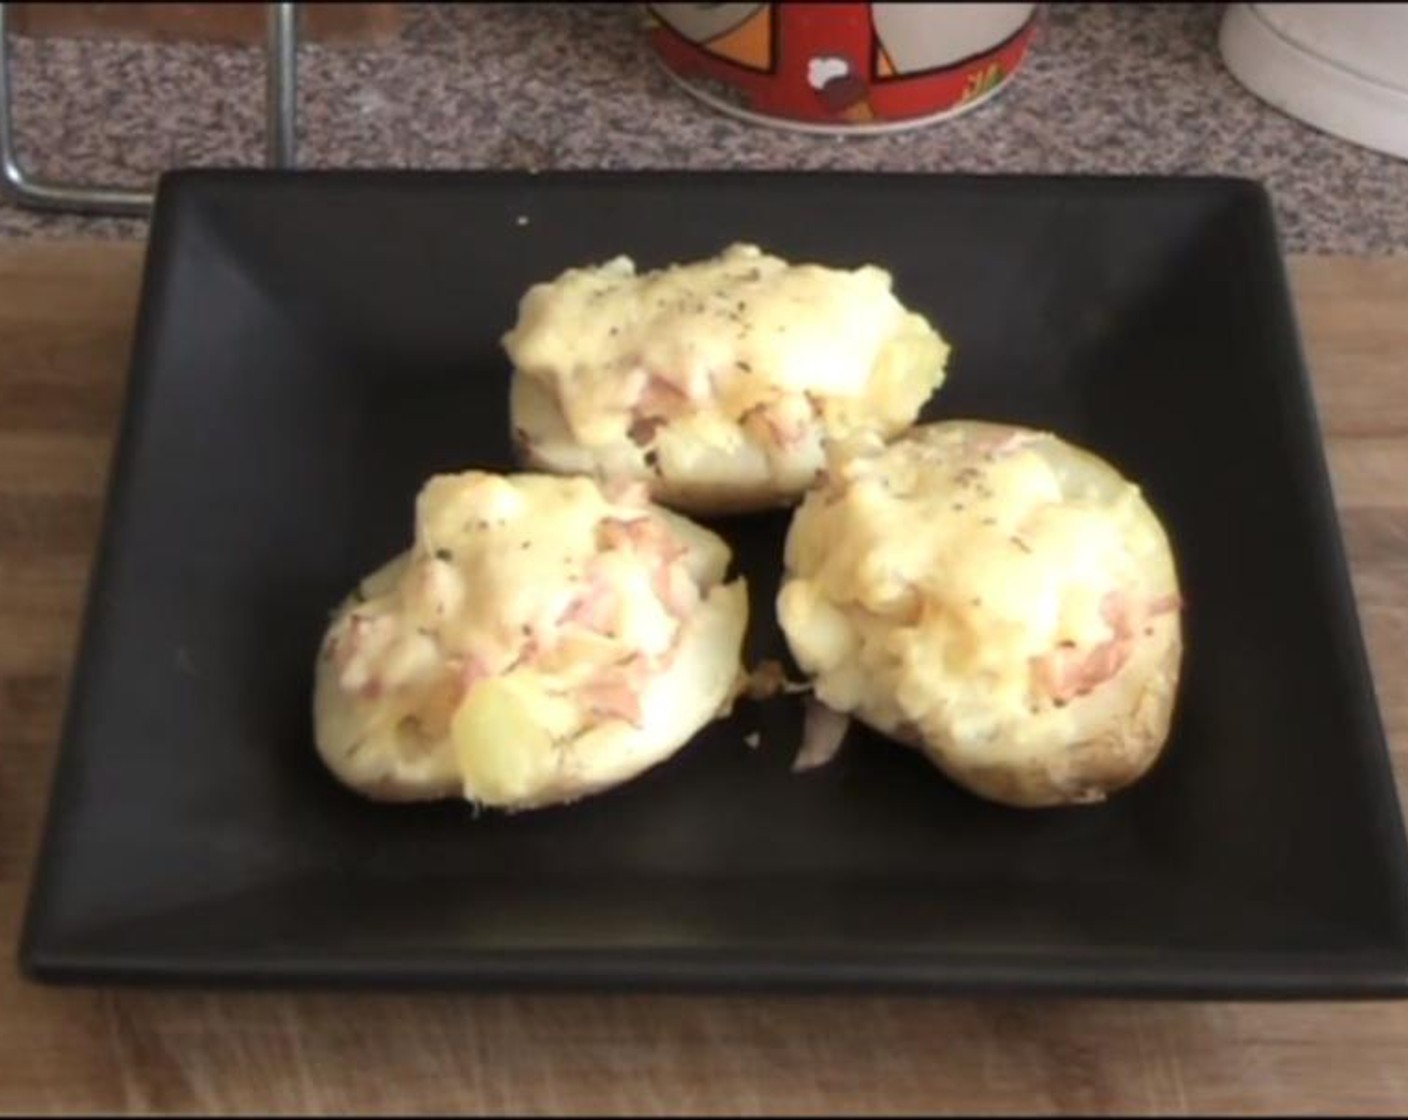 step 4 Top the potatoes with Cheese (1/2 cup). Put them back into the oven at 200 degrees C (400 degrees F) for fifteen minutes. Take out and serve.